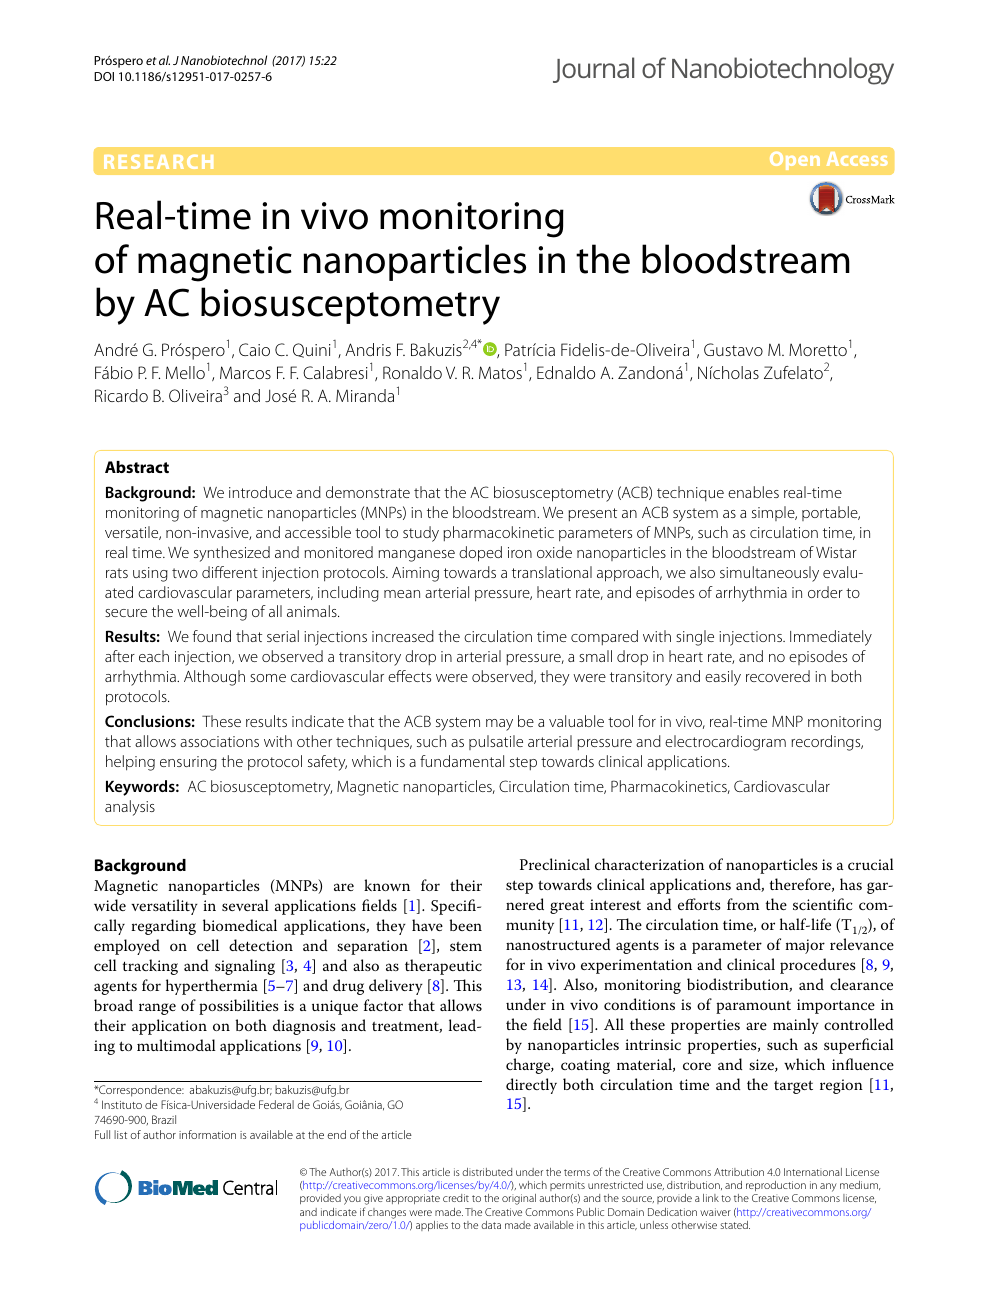 Real Time In Vivo Monitoring Of Magnetic Nanoparticles In The Bloodstream By Ac Biosusceptometry Topic Of Research Paper In Nano Technology Download Scholarly Article Pdf And Read For Free On Cyberleninka Open Science